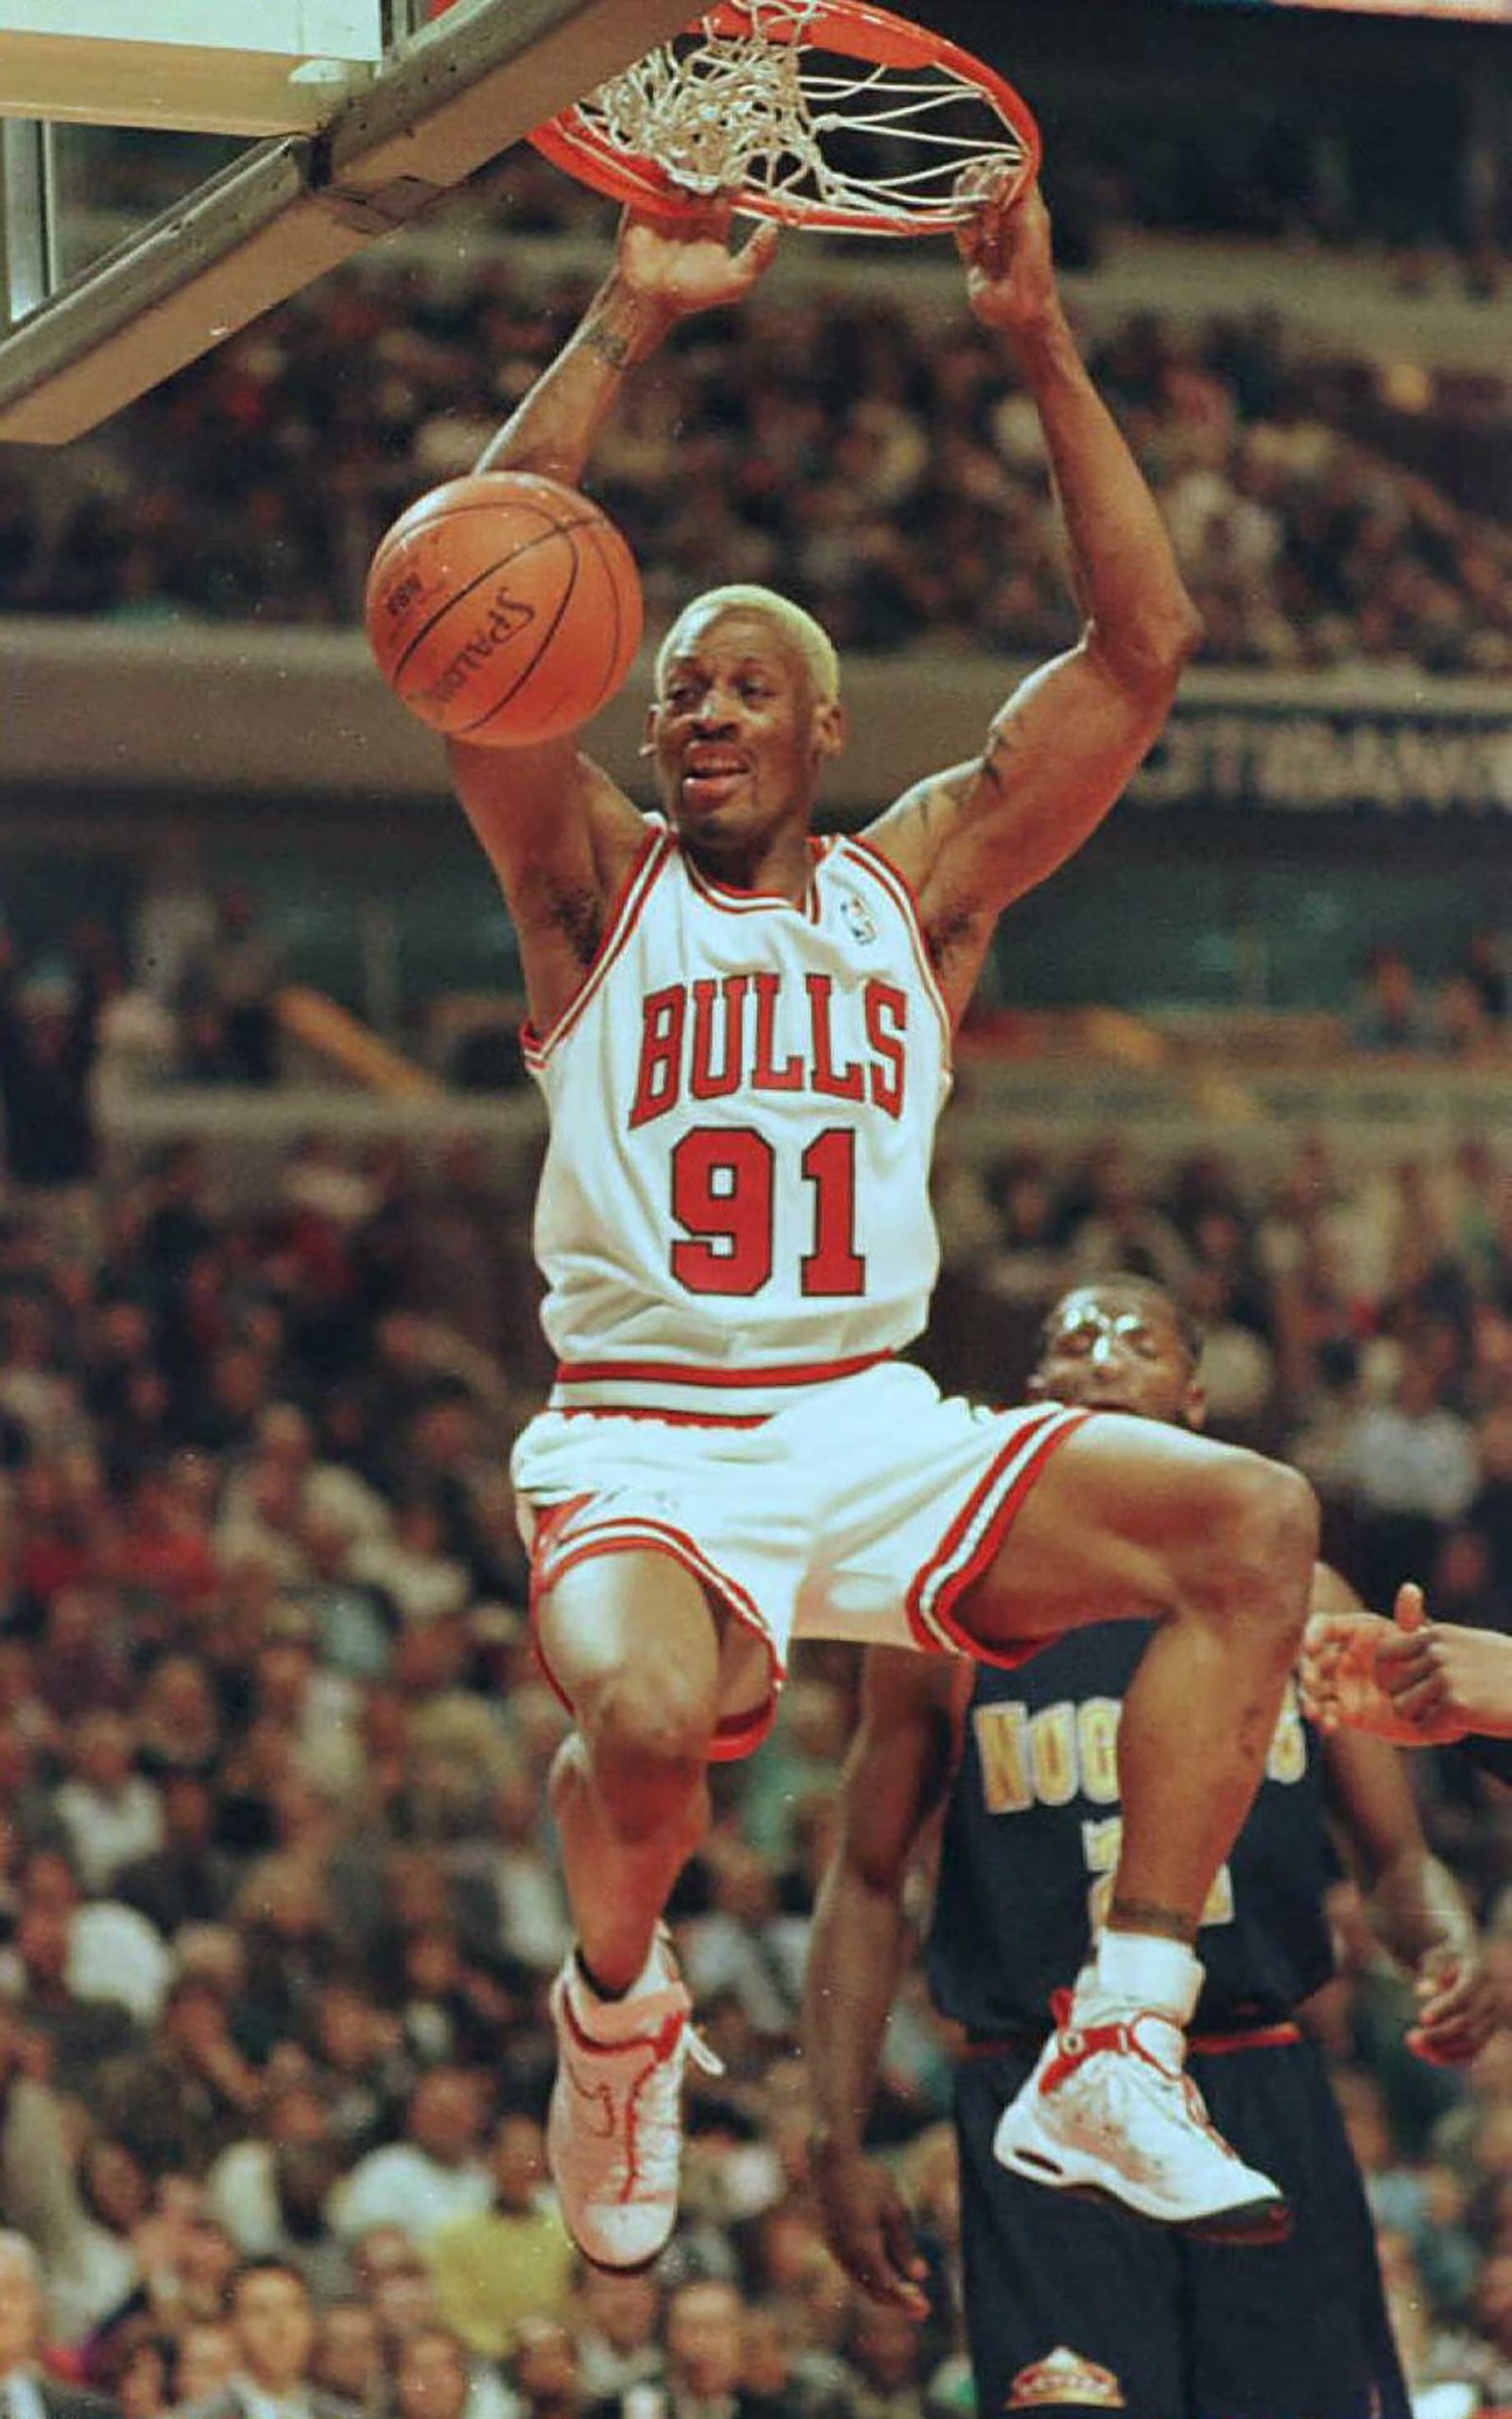 Latest sports news: Last Dance shows Dennis Rodman could have been a social  media icon during his playing career, for good and for bad